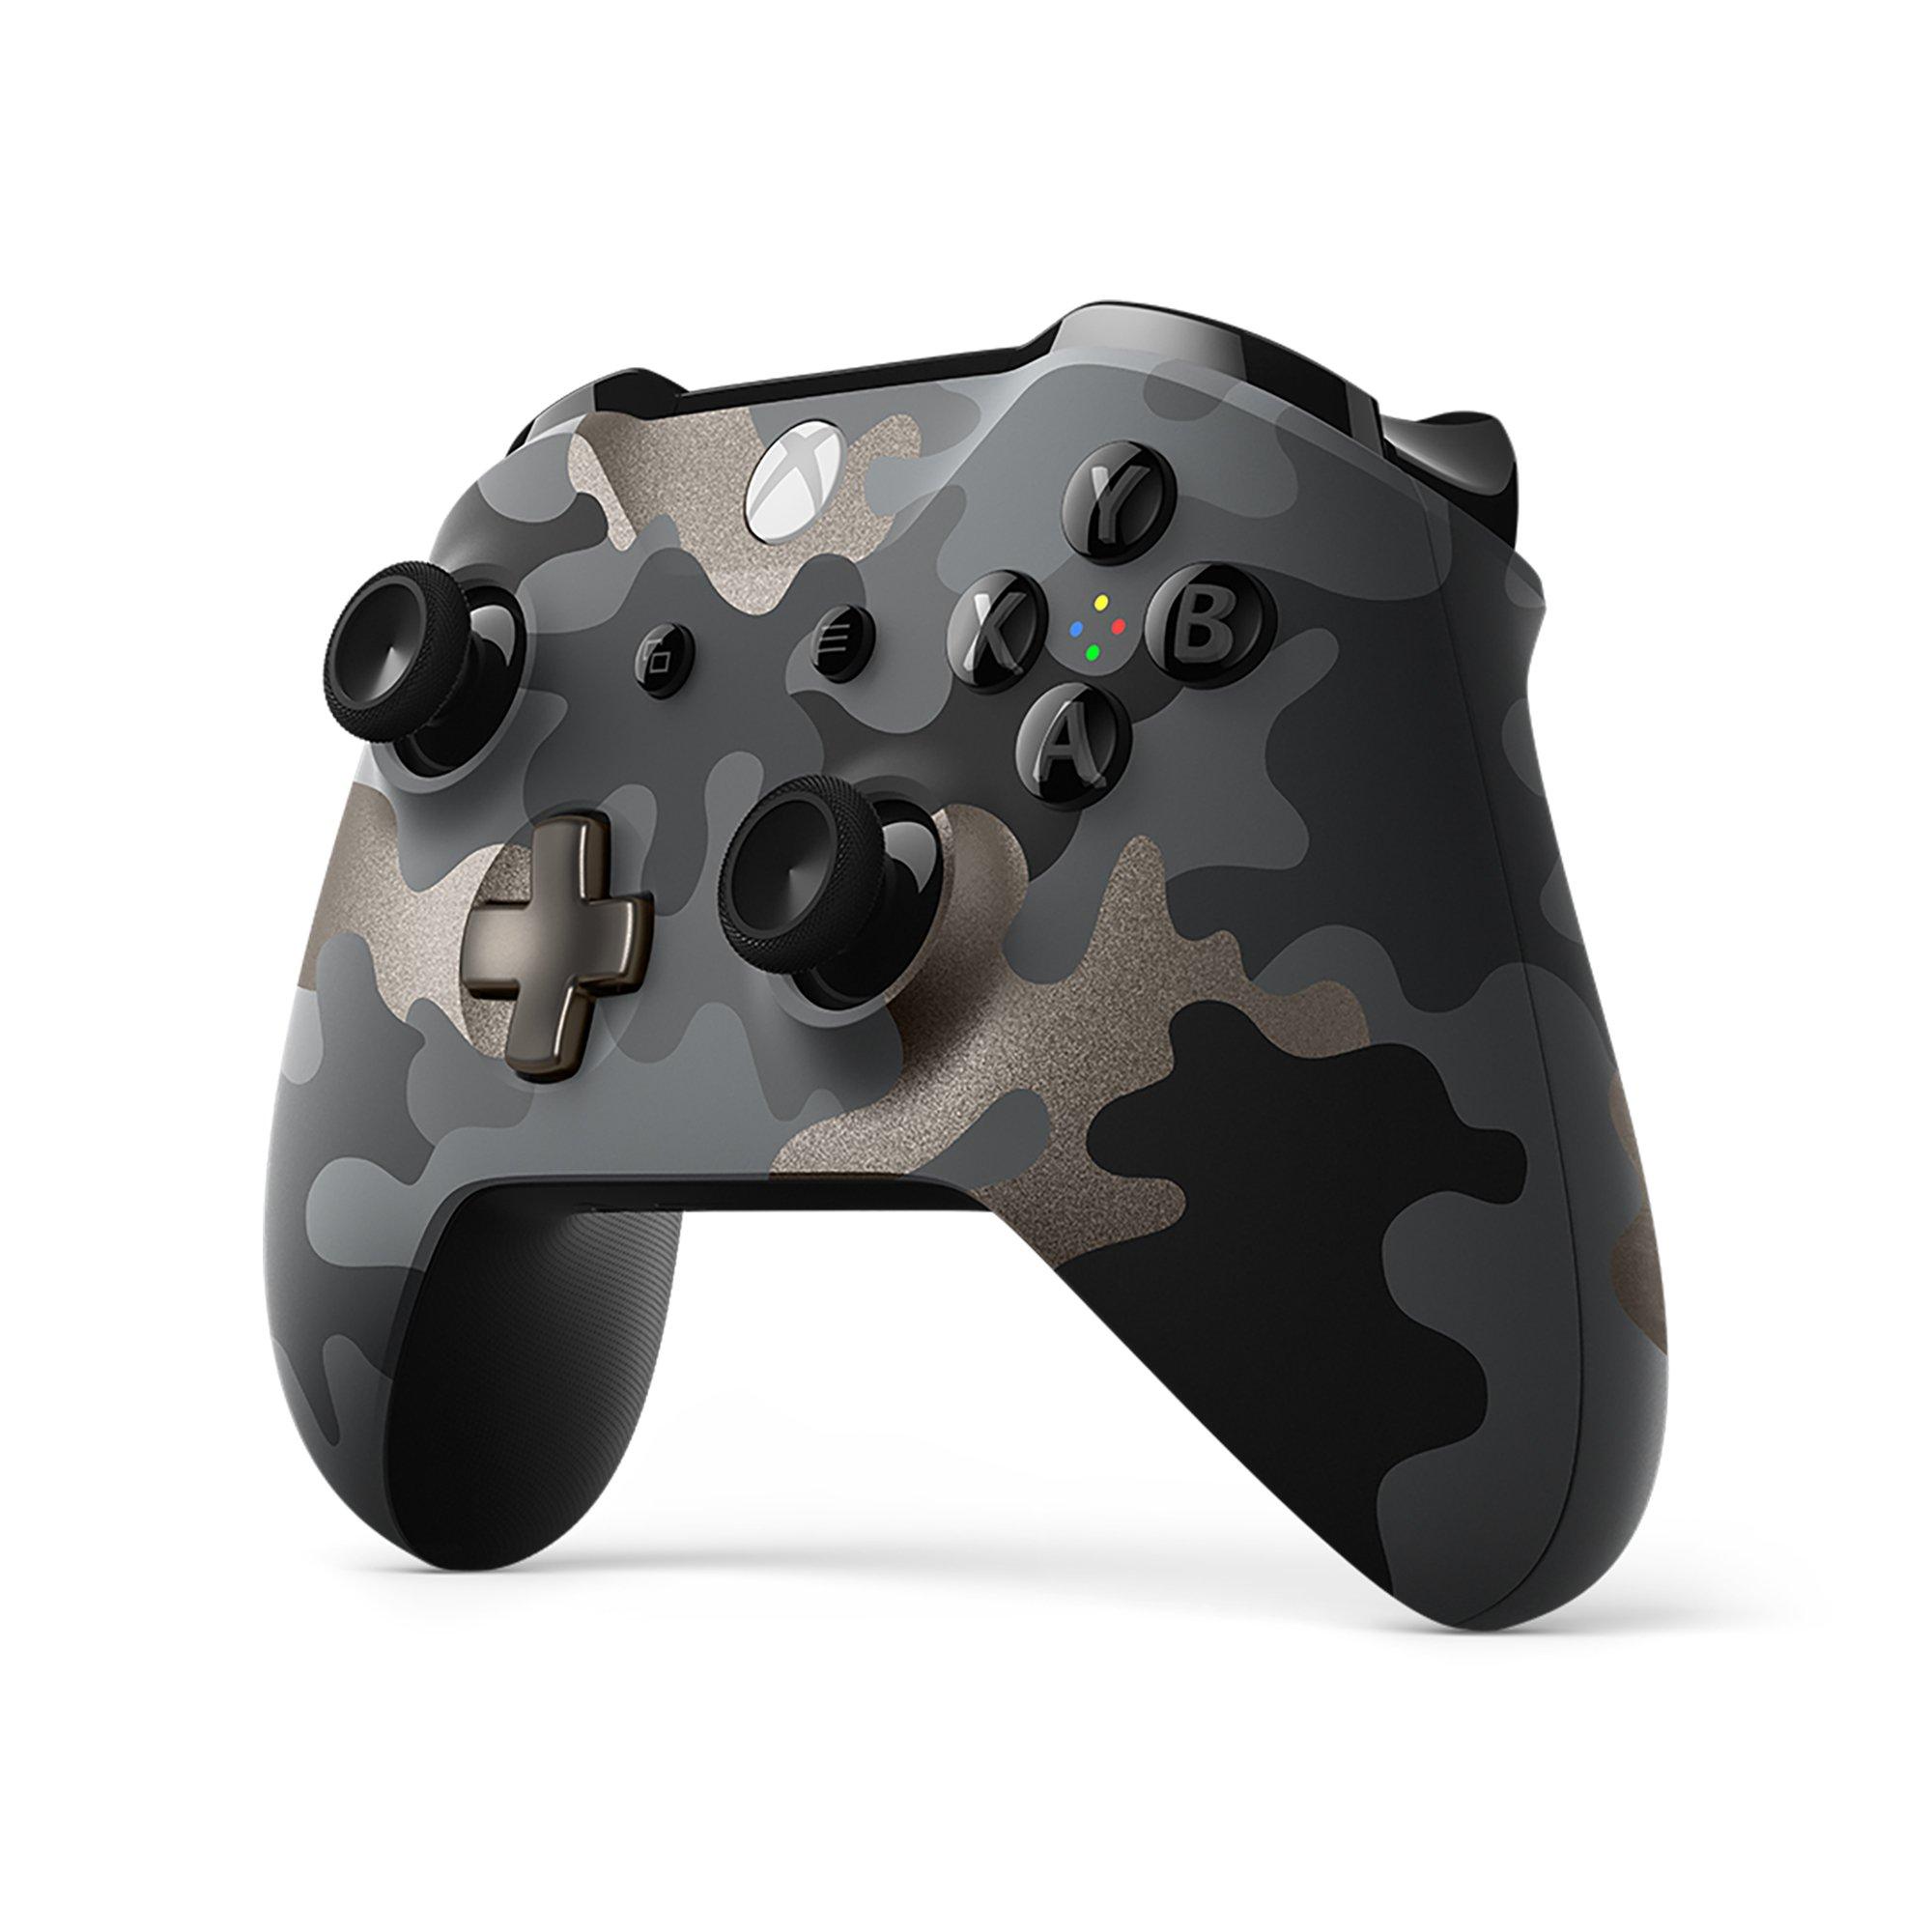 night ops camo special edition